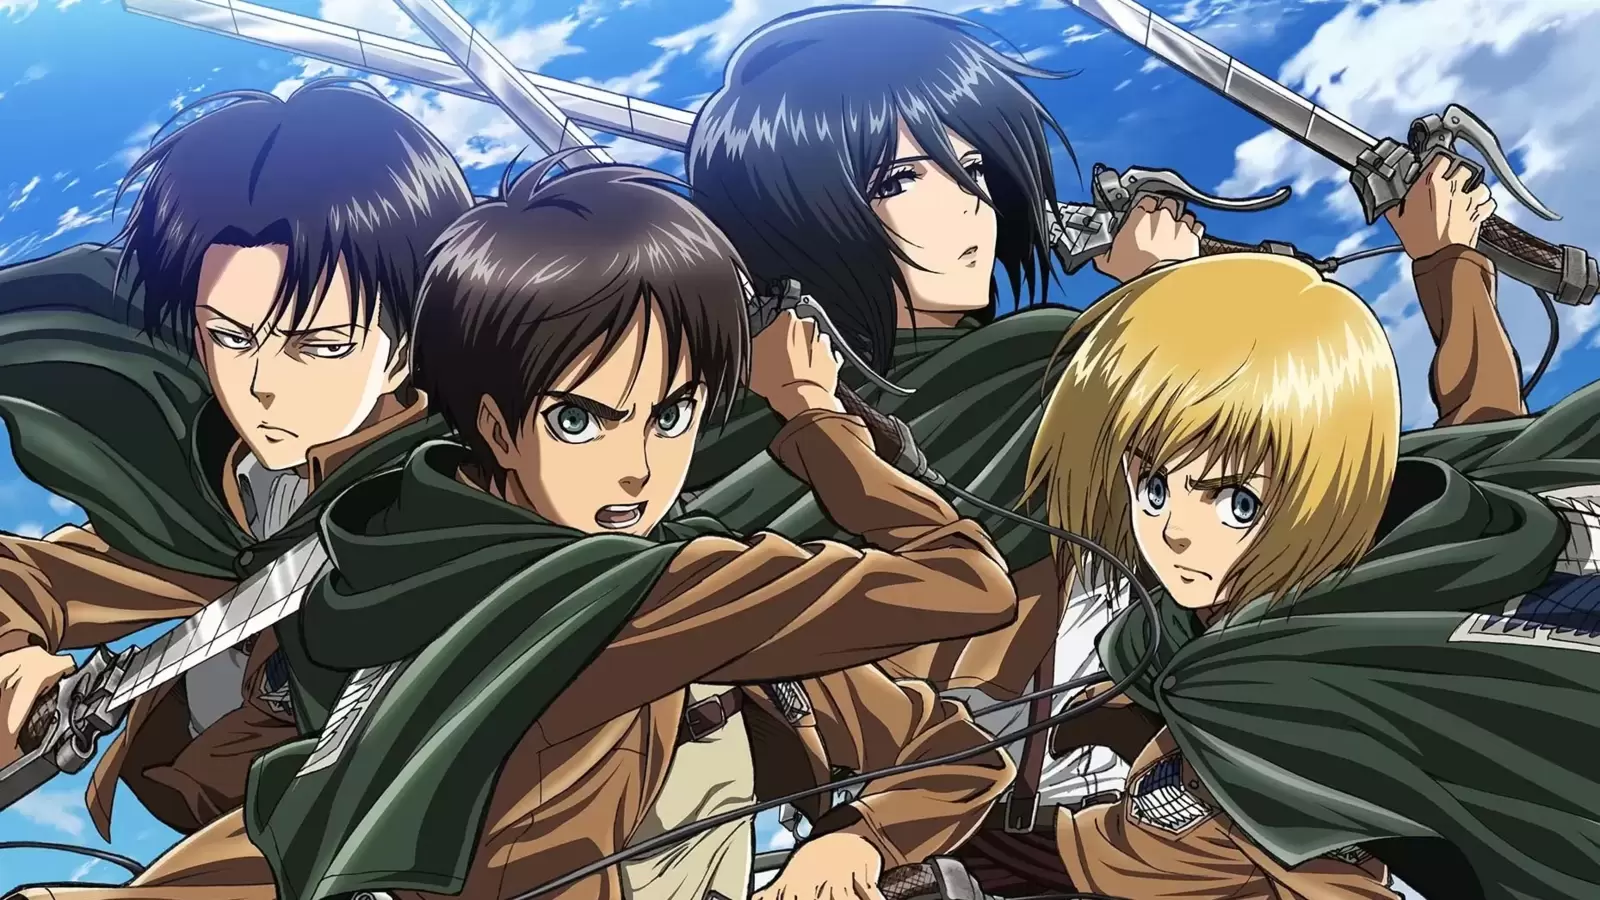 Breaking: The Final Act of Attack on Titan — Why Everyone Is Talking About the Anime’s Epic Conclusion